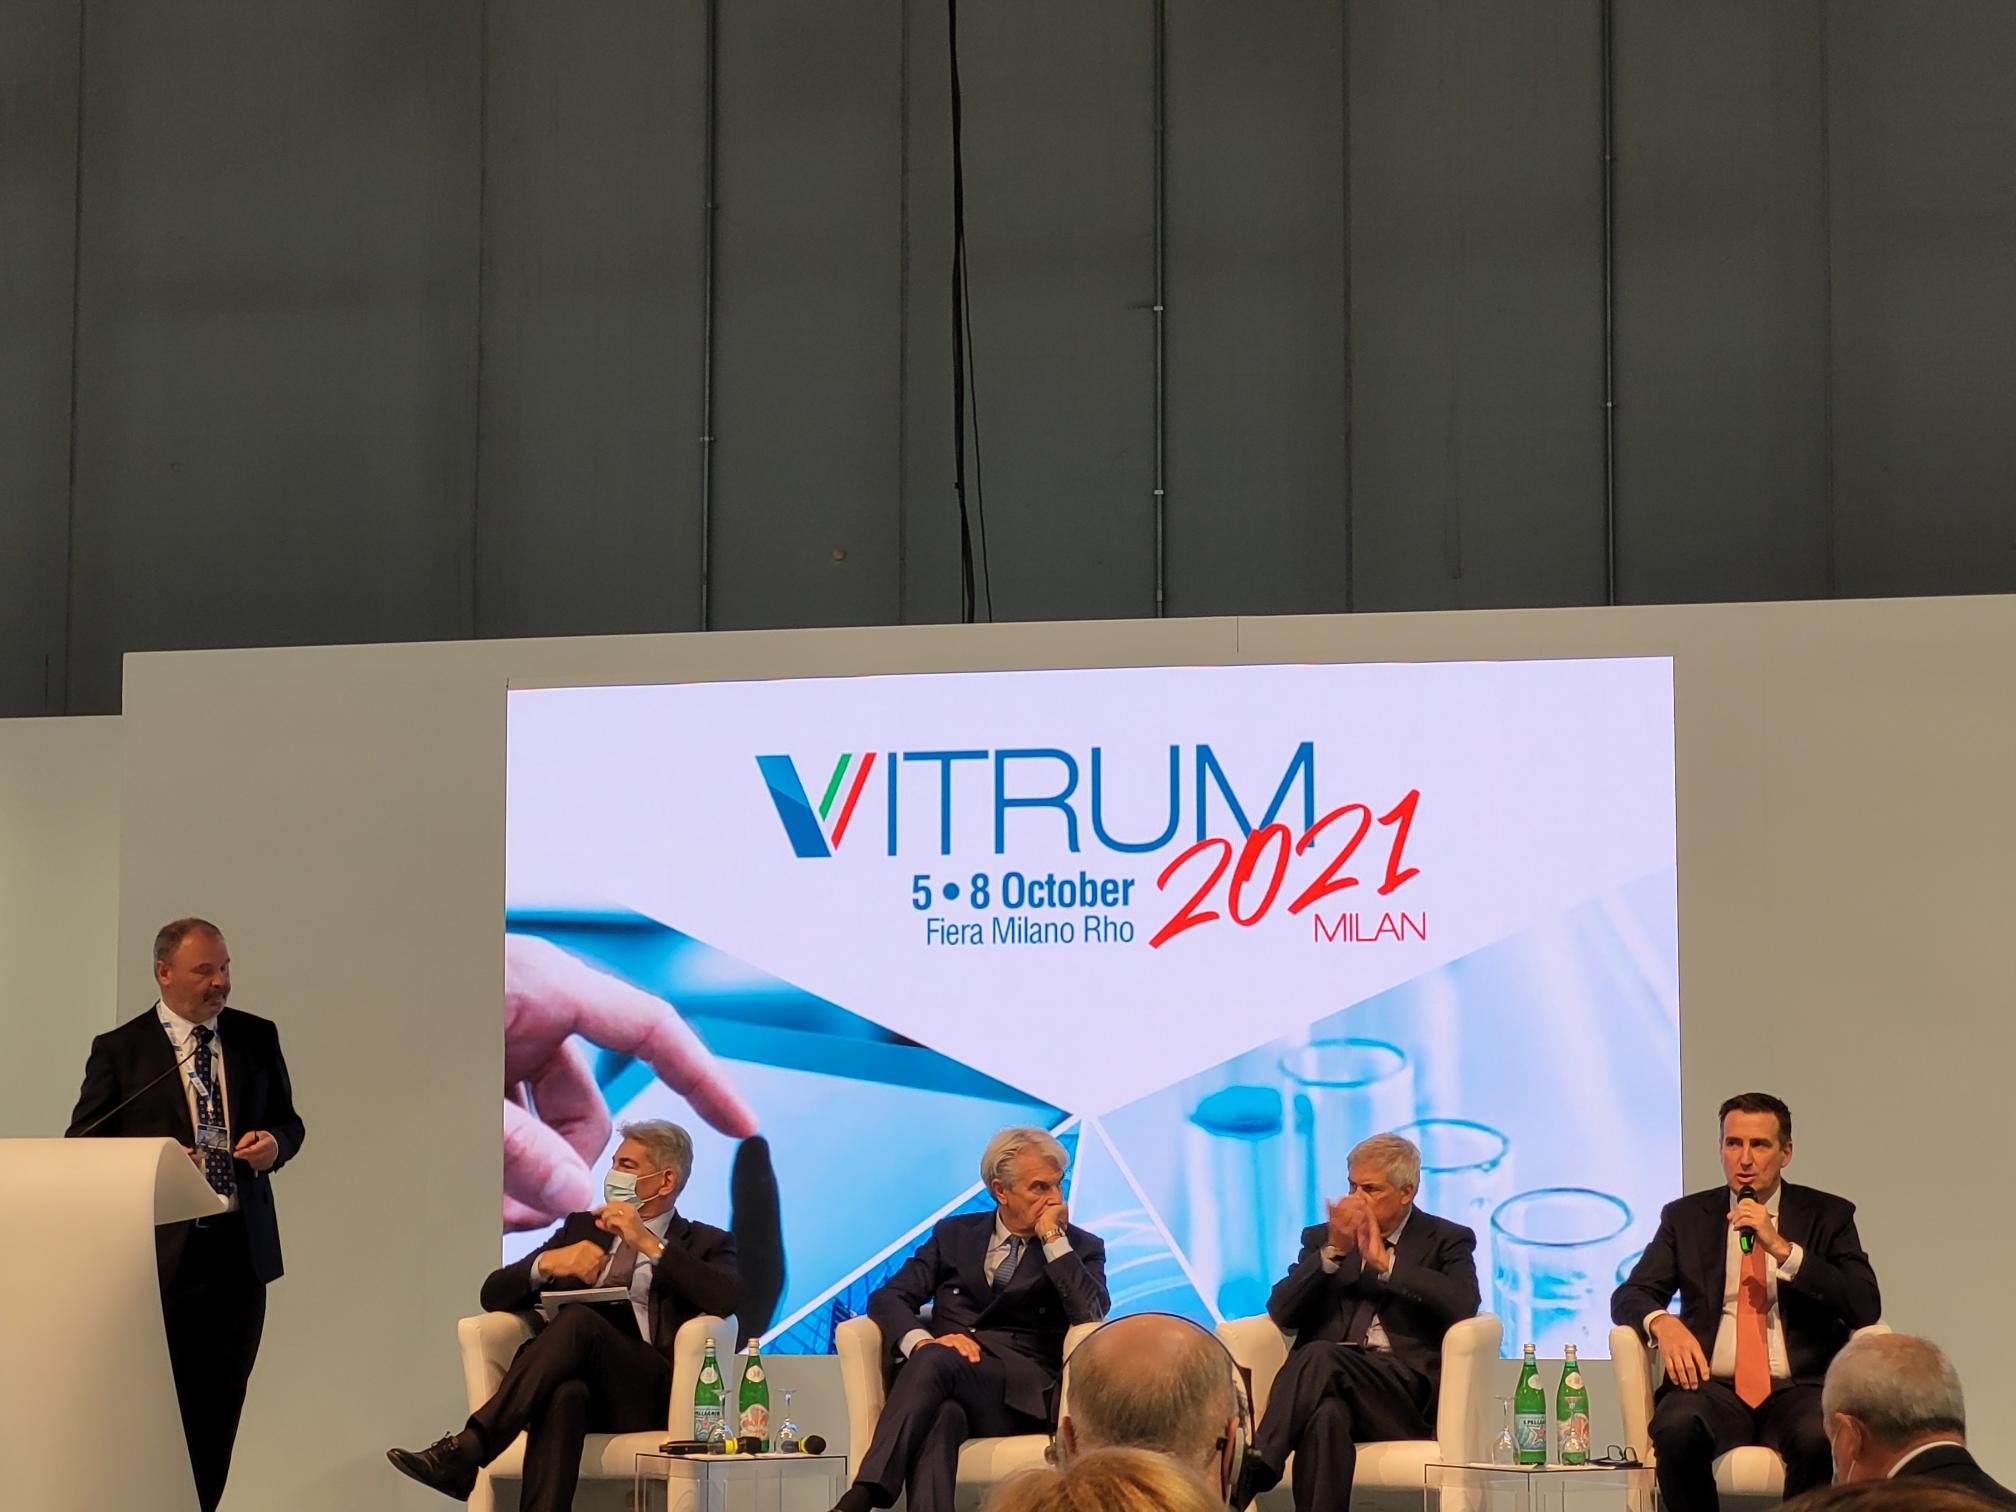 Vitrum 2021 Opening Press Conference